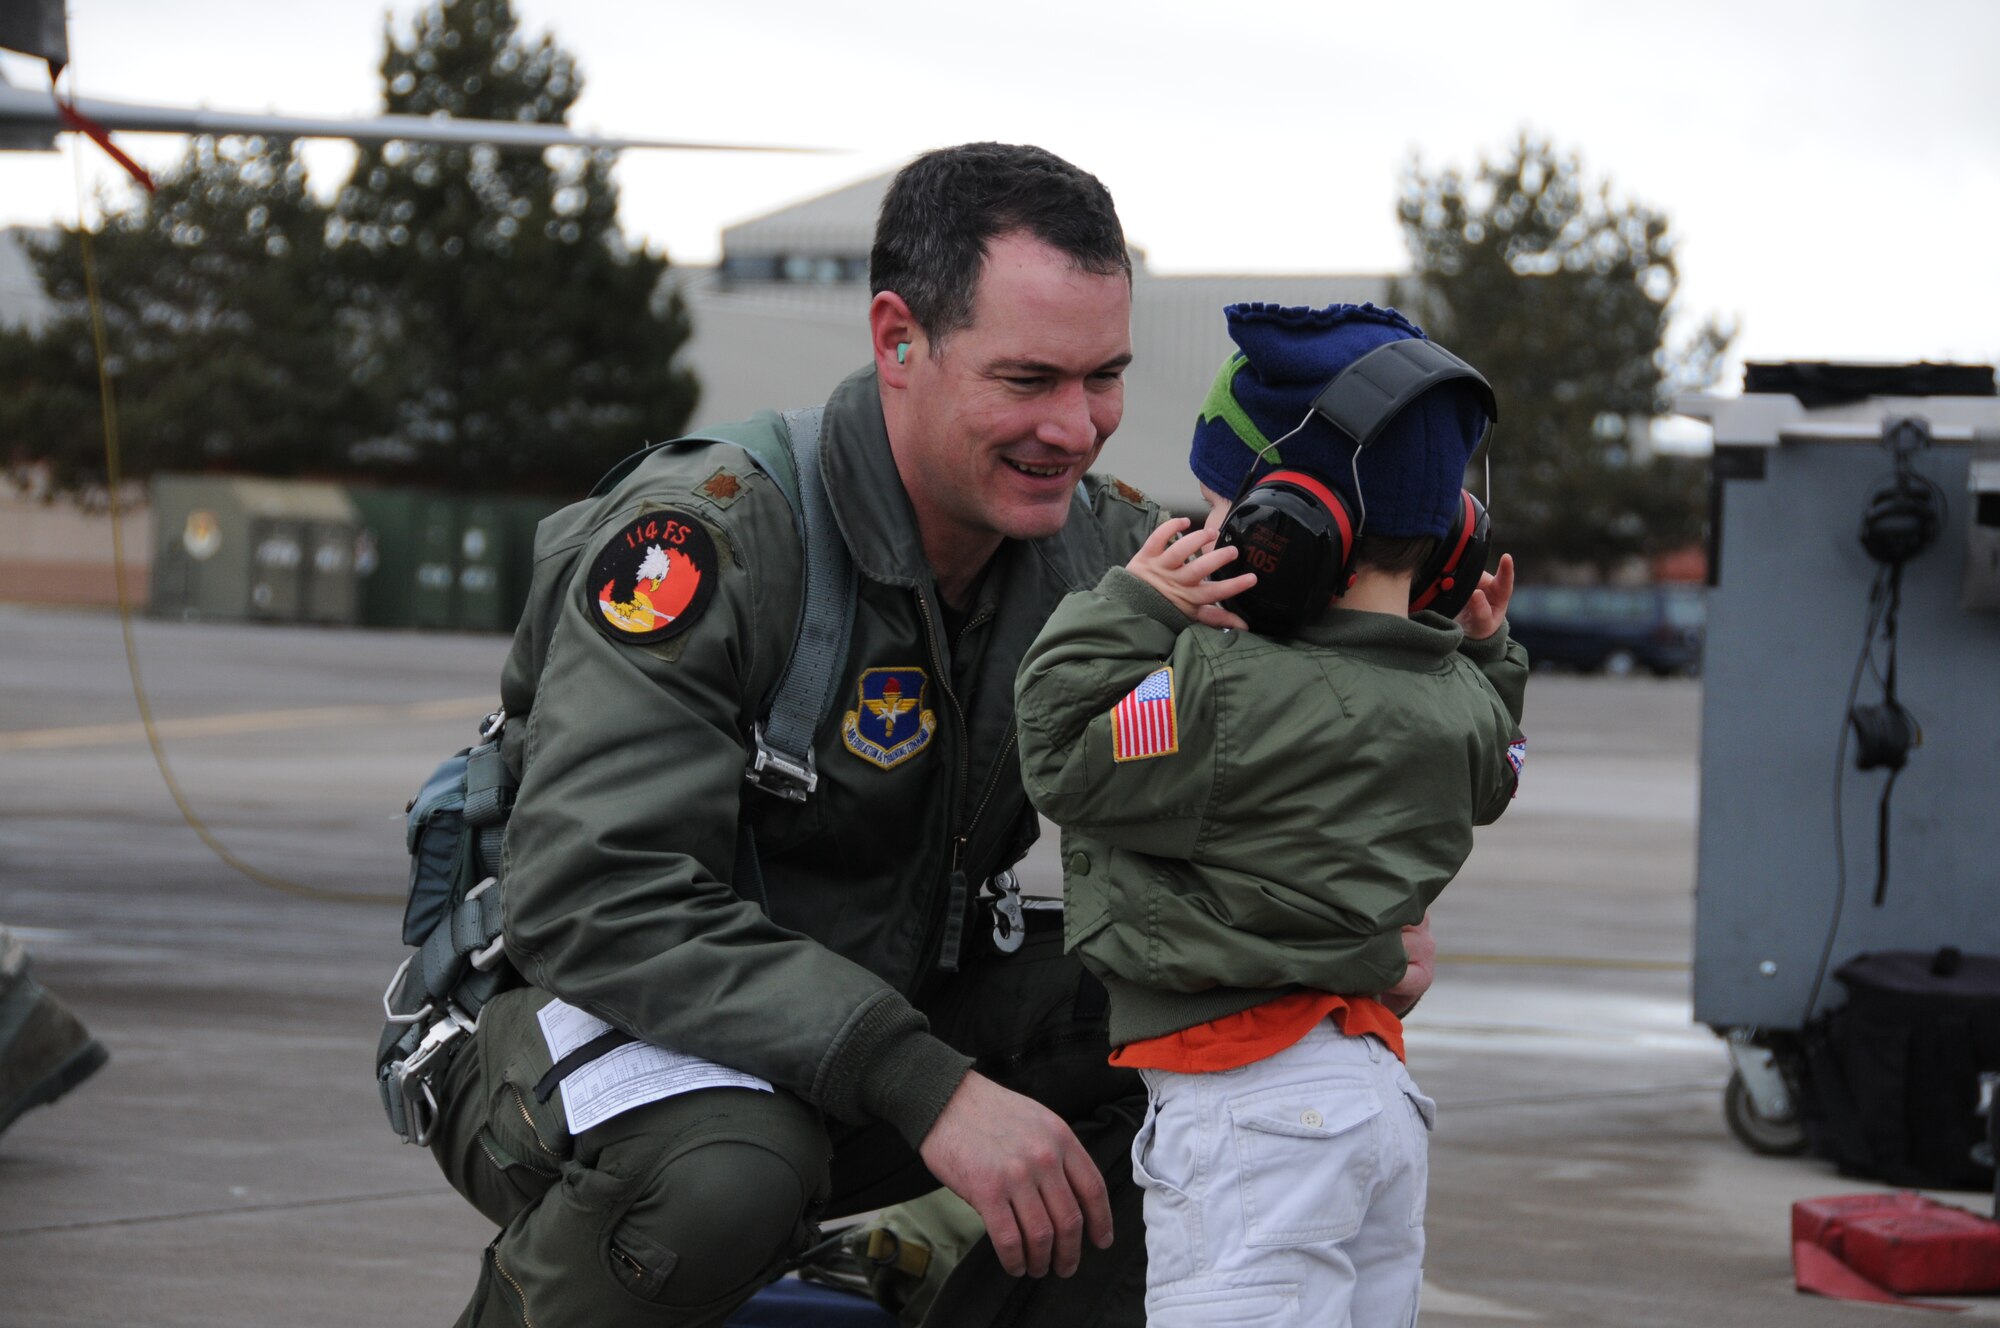 Maj. Jeffrey Smith, 173rd Fighter Wing F-15 Instructor Pilot, is greeted by his two year old son following a routine training mission that marked his 2,000 hour flying the F-15 Eagle at Kingsley Field, Klamath Falls, Ore. February 12, 2010.  (U.S. Air Force photo by Tech. Sgt. Jennifer Shirar, Released)  